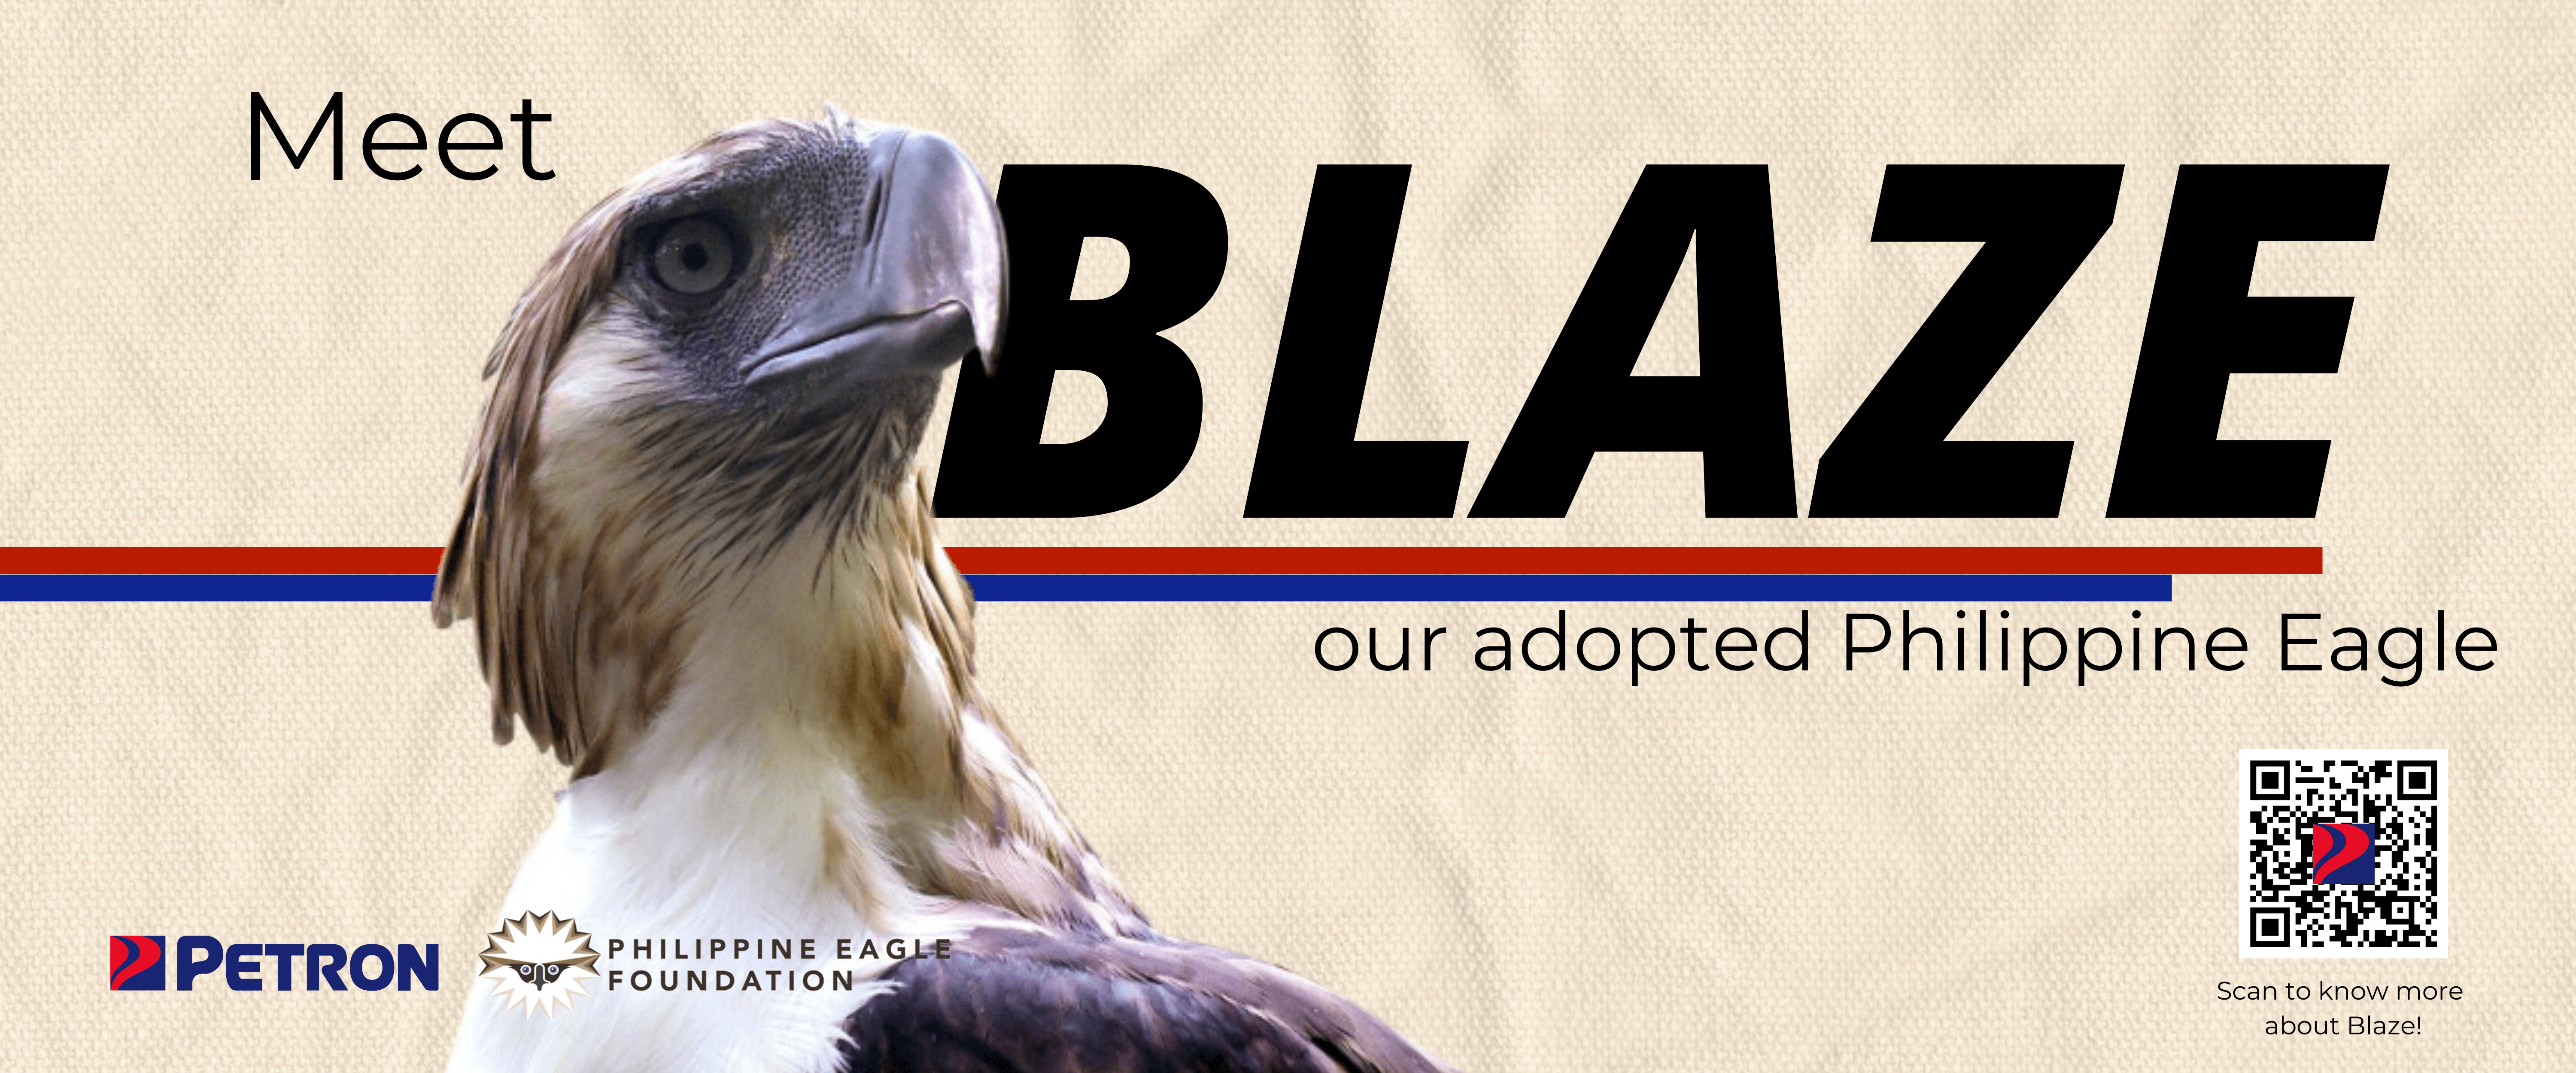 Petron adopts Blaze the Philippine Eagle in celebration of Earth Day